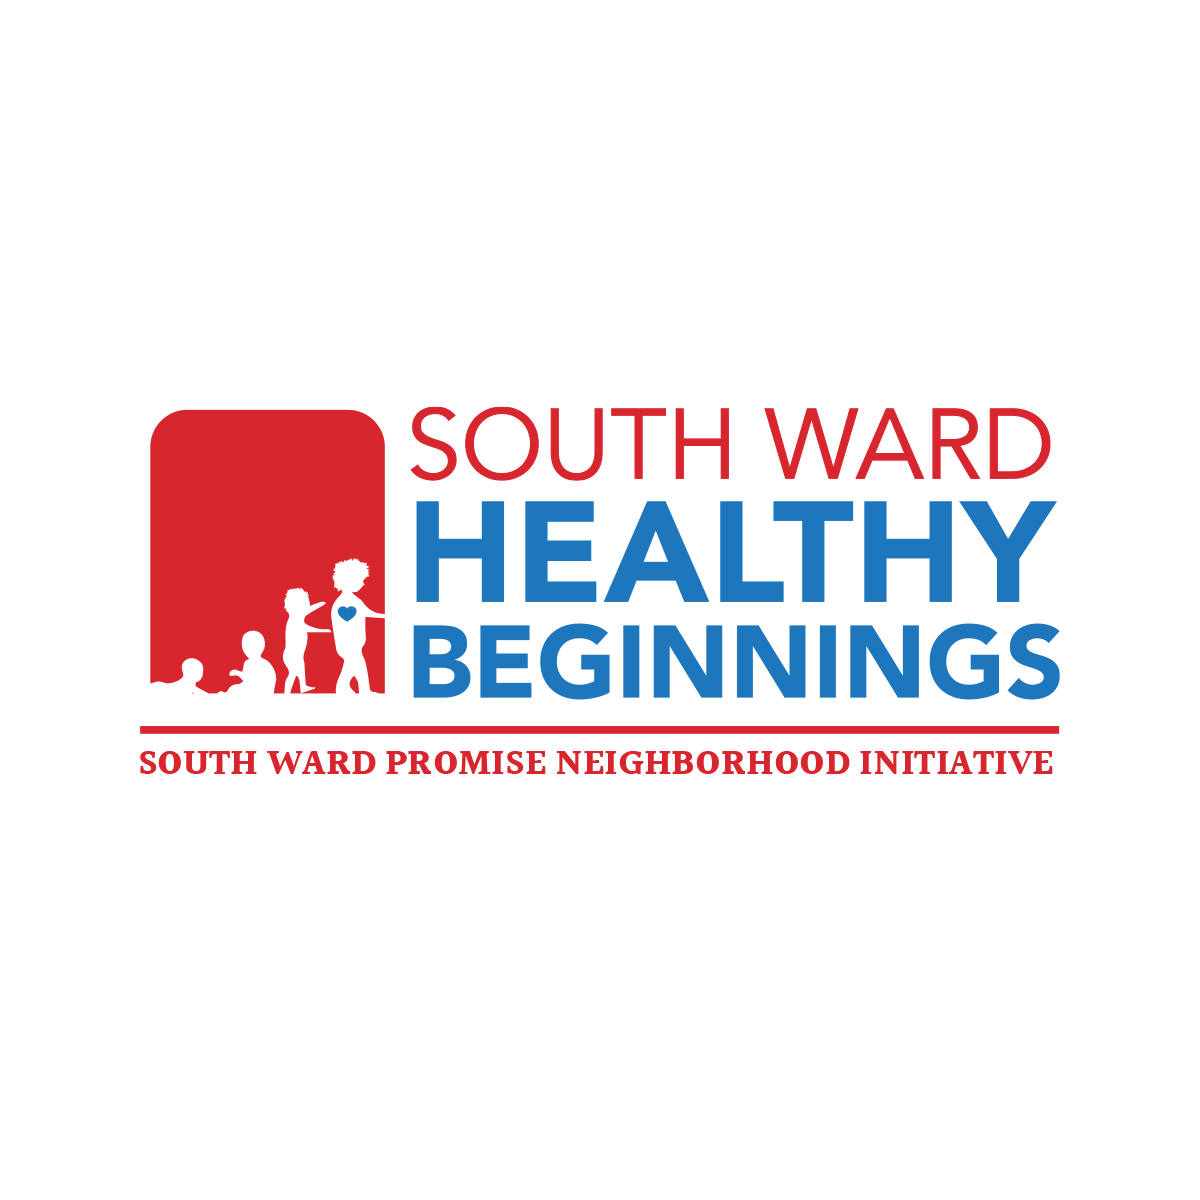 https://southwardpromise.org/wp-content/uploads/2023/02/SOUTH-WARD-HEALTHY-BEG_color-copy.png